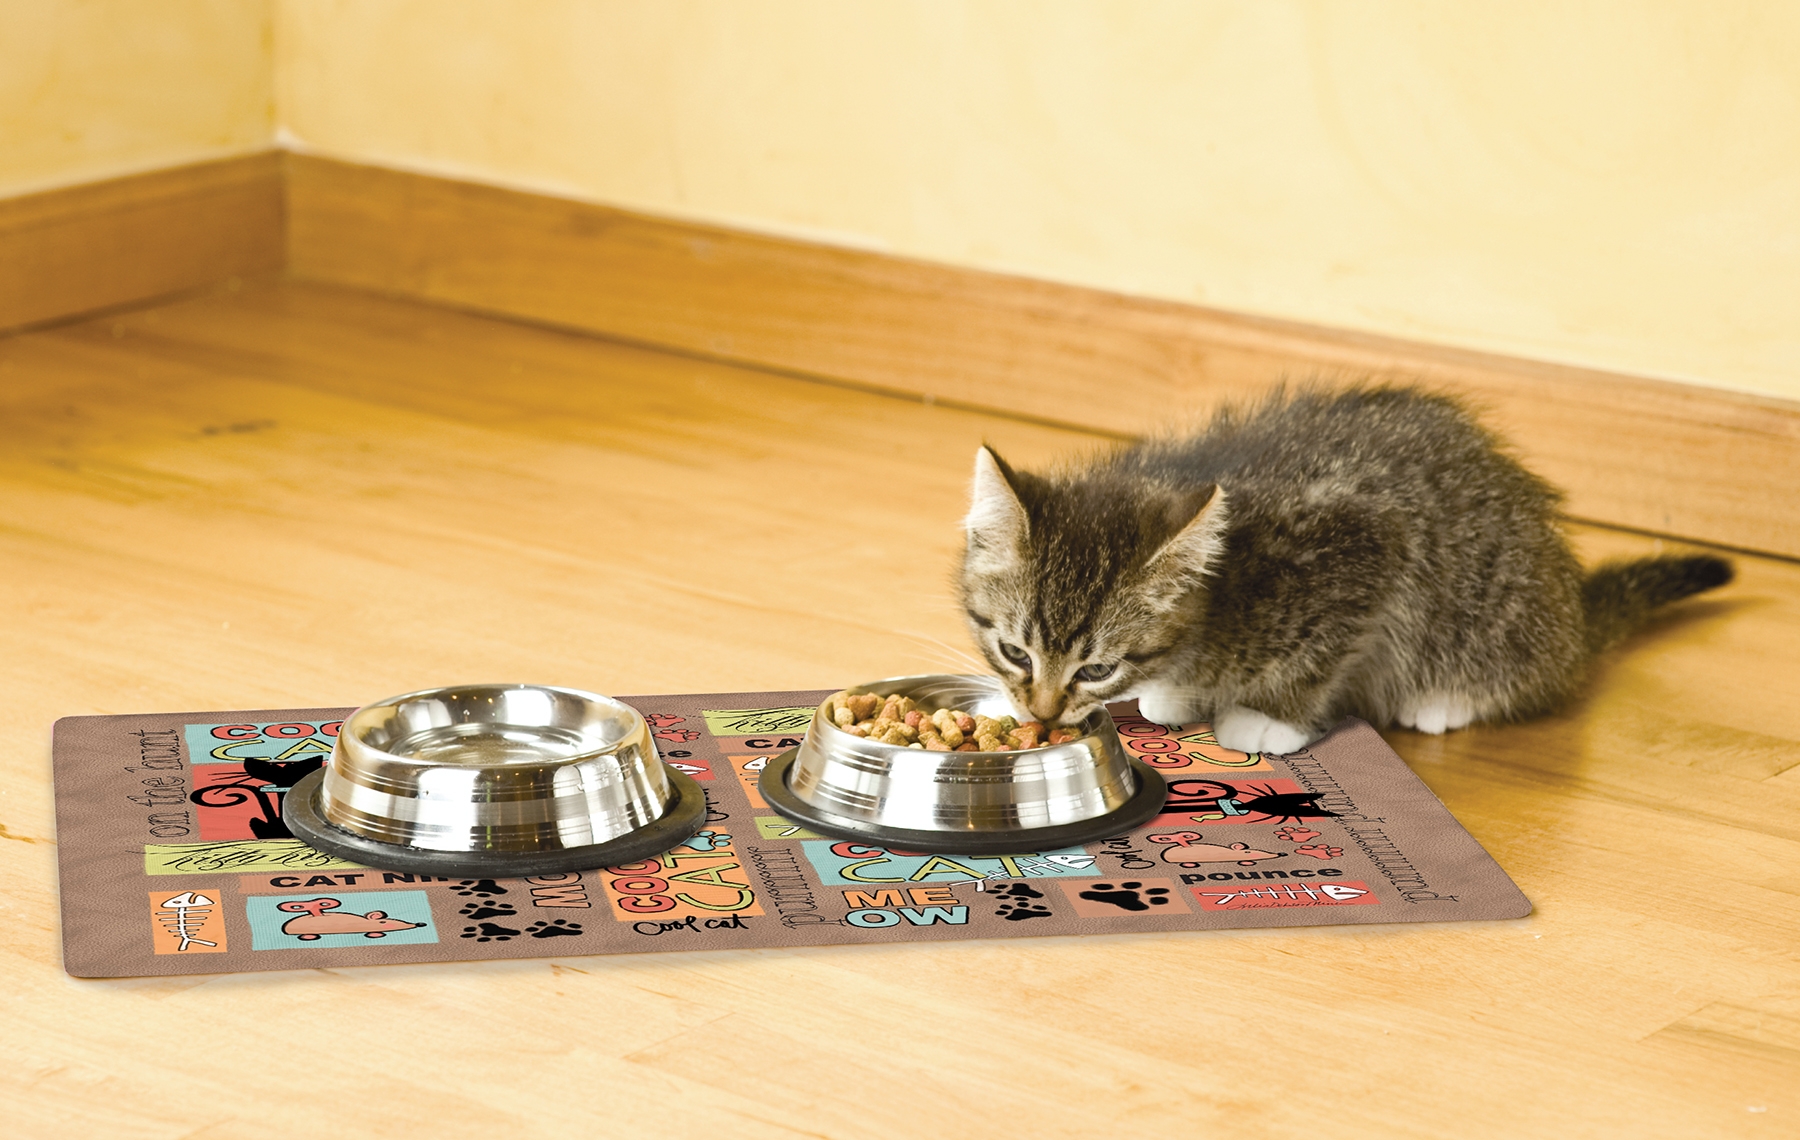 https://www.ecodogsandcats.com/wp-content/uploads/2019/10/cpm1220bncc_cool_cat_brown_placemat_in_use.jpg